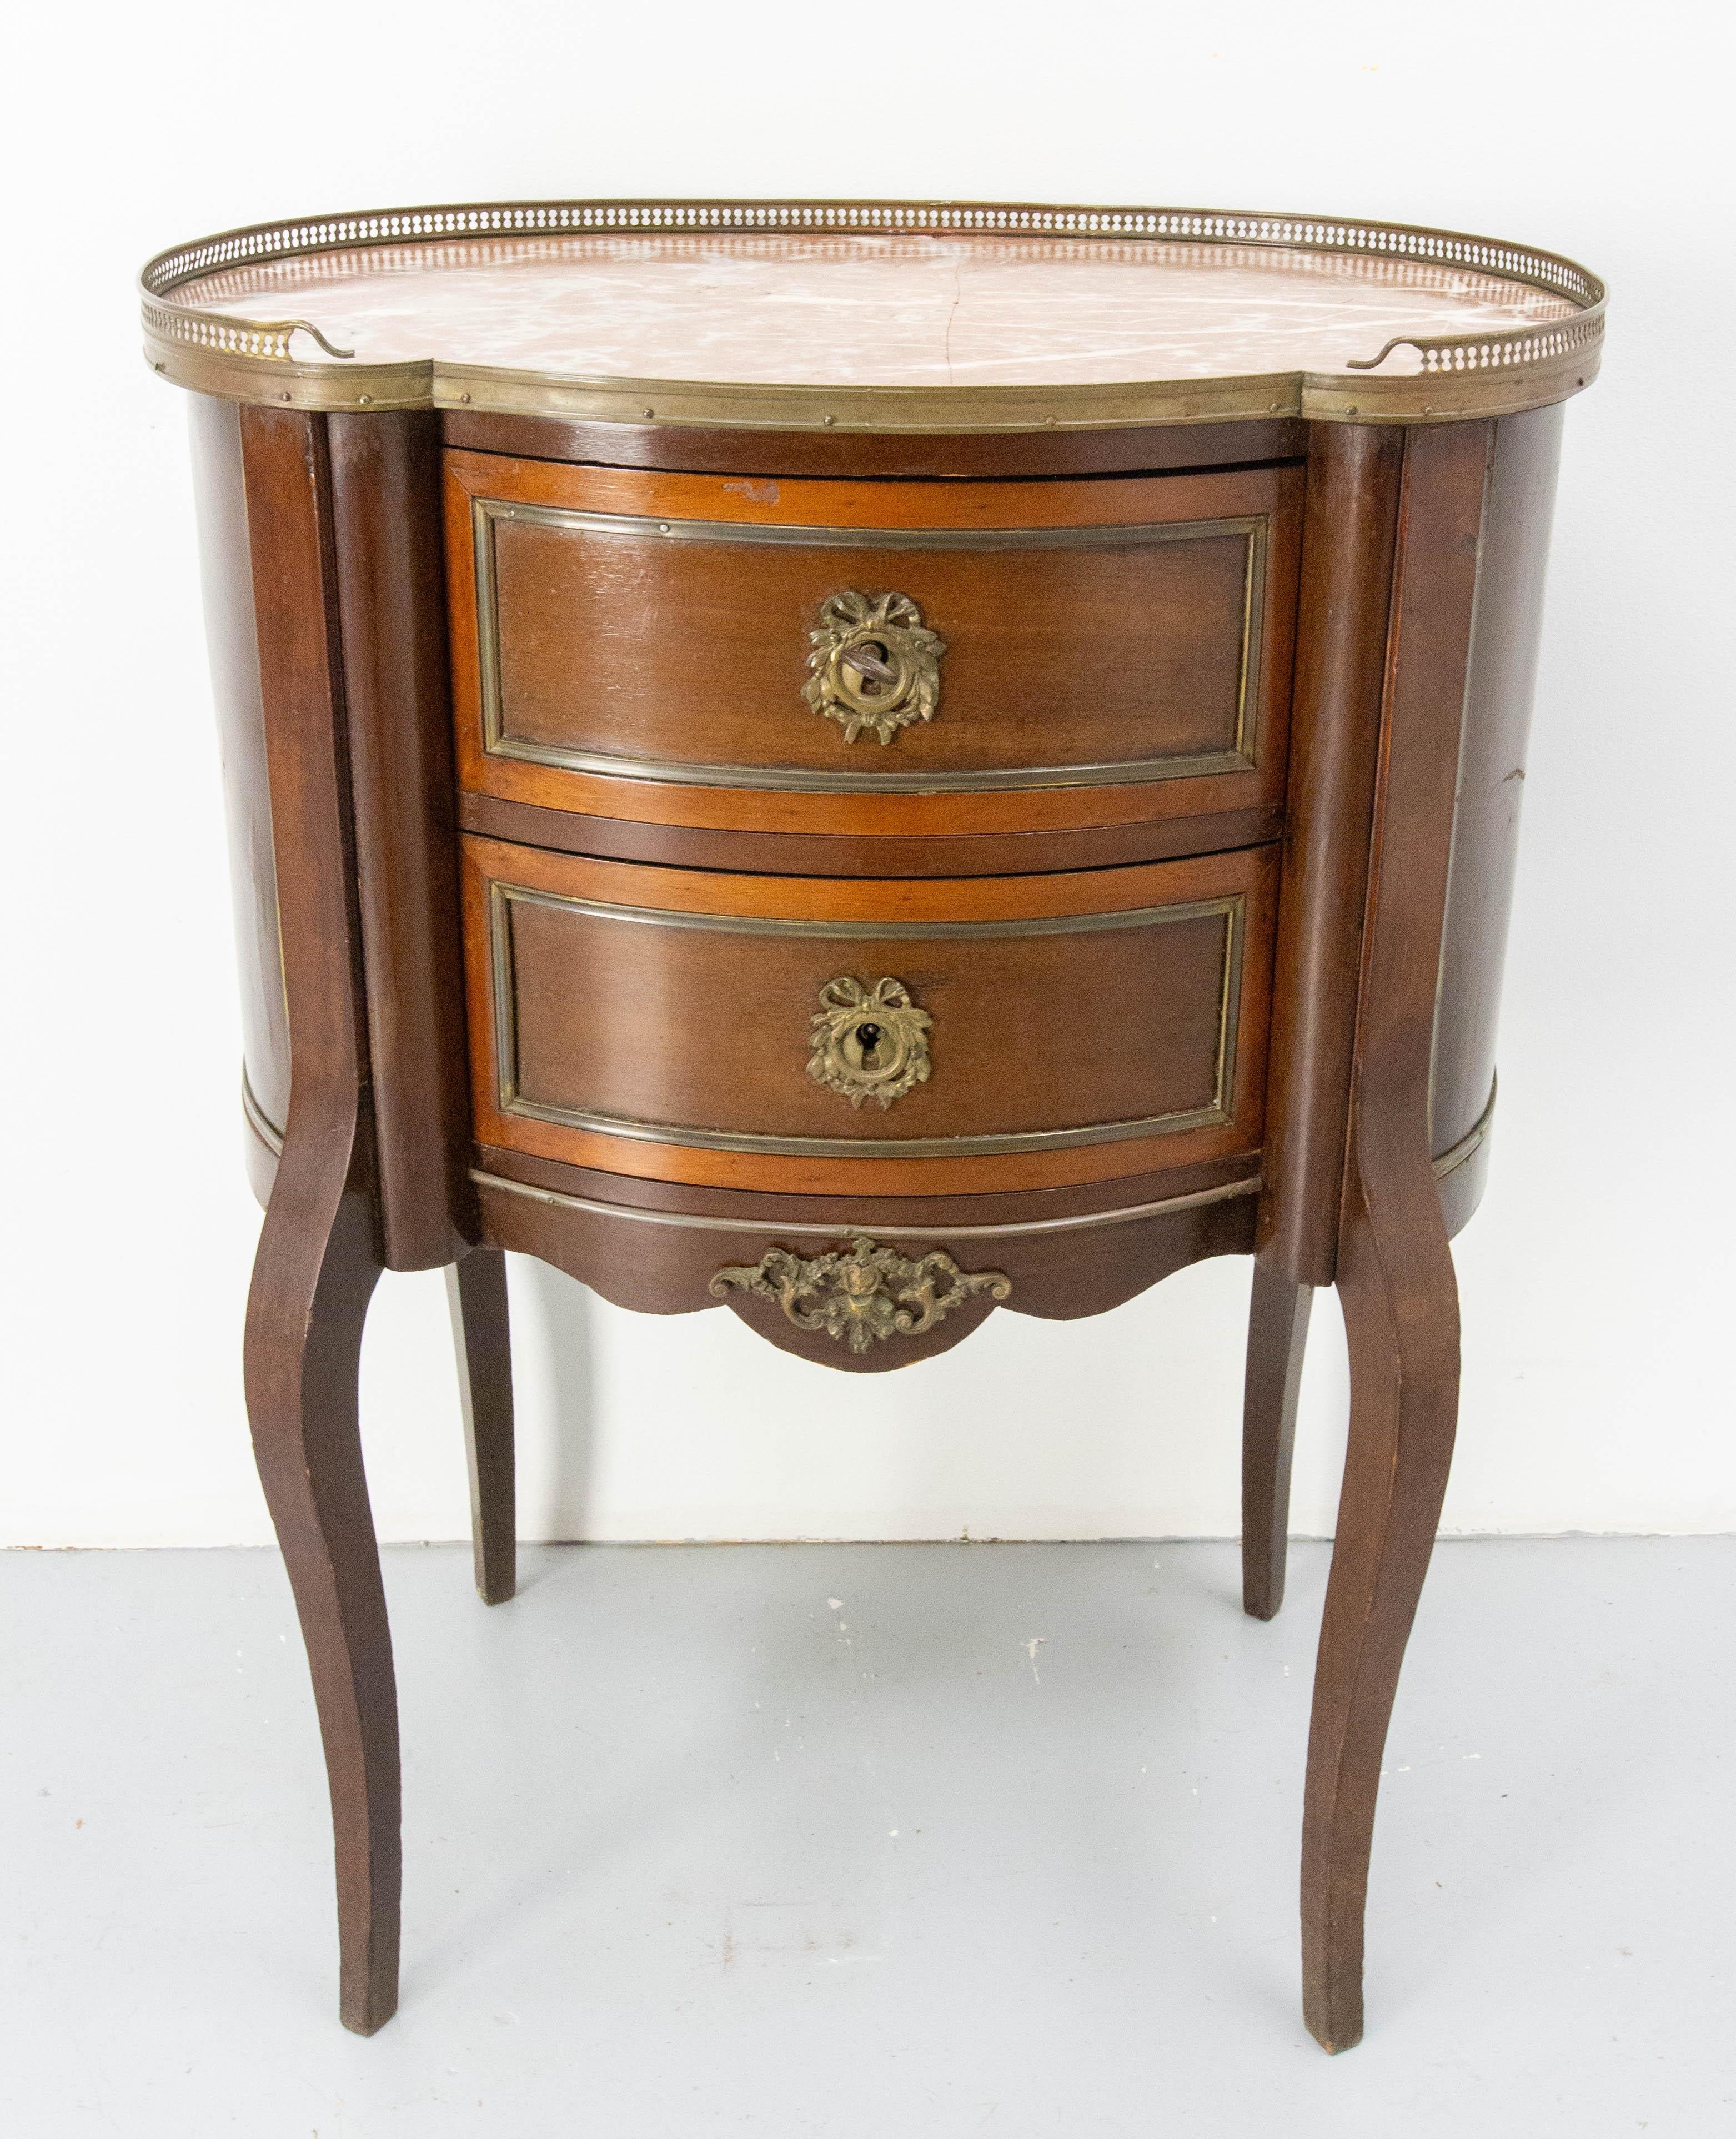 Antique commode in the Louis XV style, French chest of drawers, circa 1960. Iroko, marble top and brass.
The kidney shape of tops on the furnitures is typical of the 18th century. It is found in the Louis XV style with curved legs and in the Louis